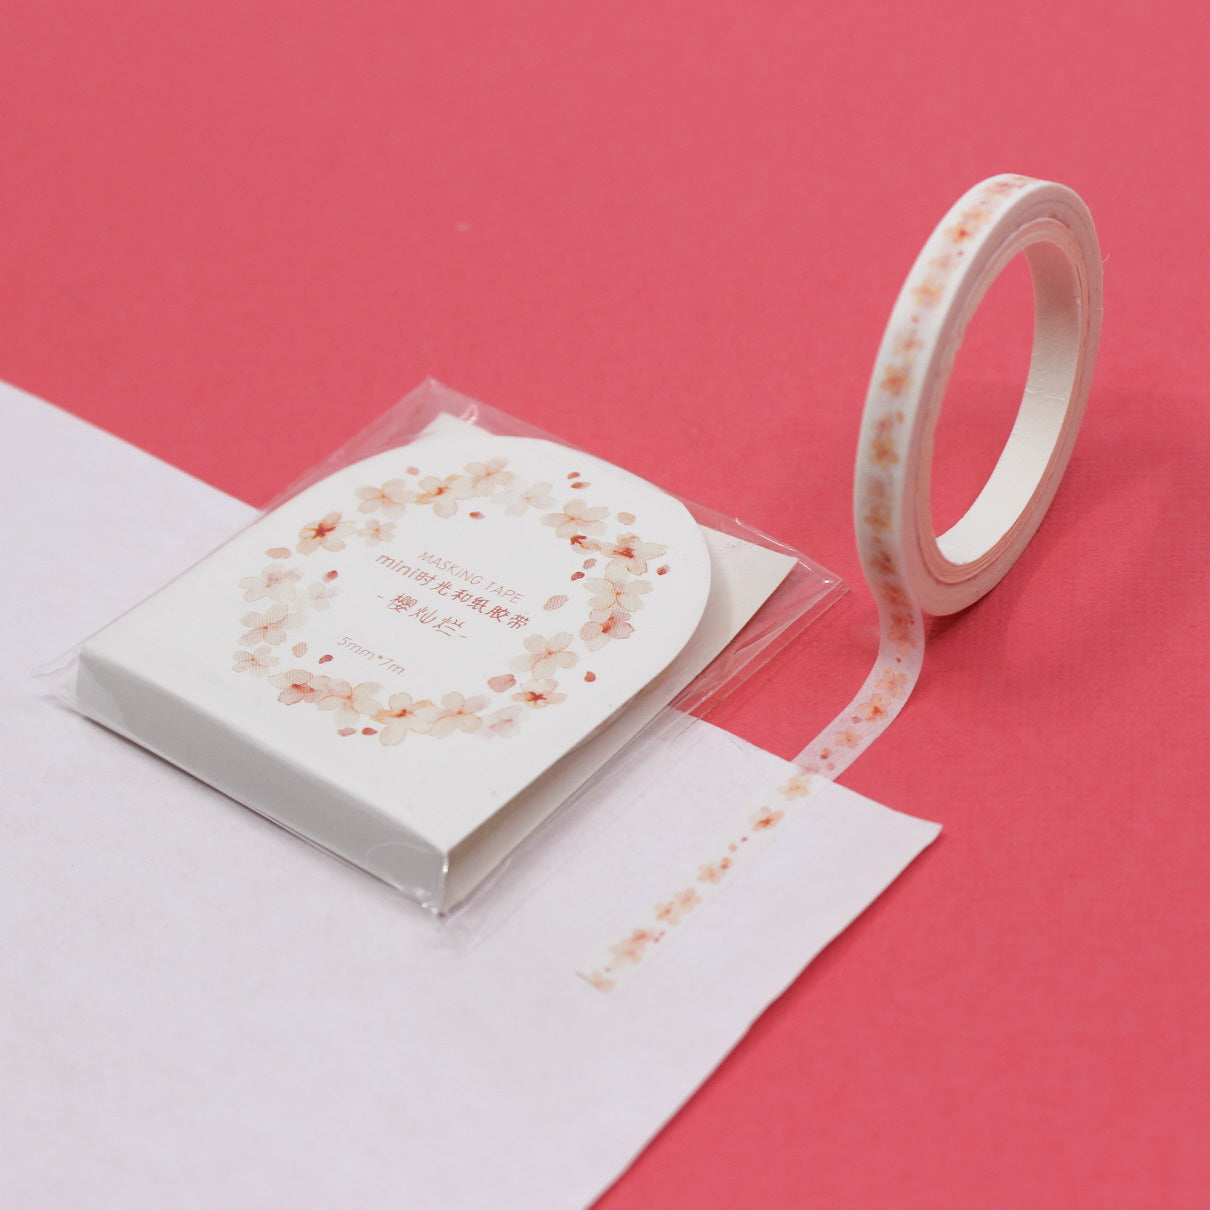 Add a touch of floral elegance to your projects with our Narrow Pink Flowers Border Washi Tape, adorned with delicate pink flower patterns. Ideal for bringing a hint of natural beauty to your crafts. This tape is sold at BBB Supplies Craft Shop.